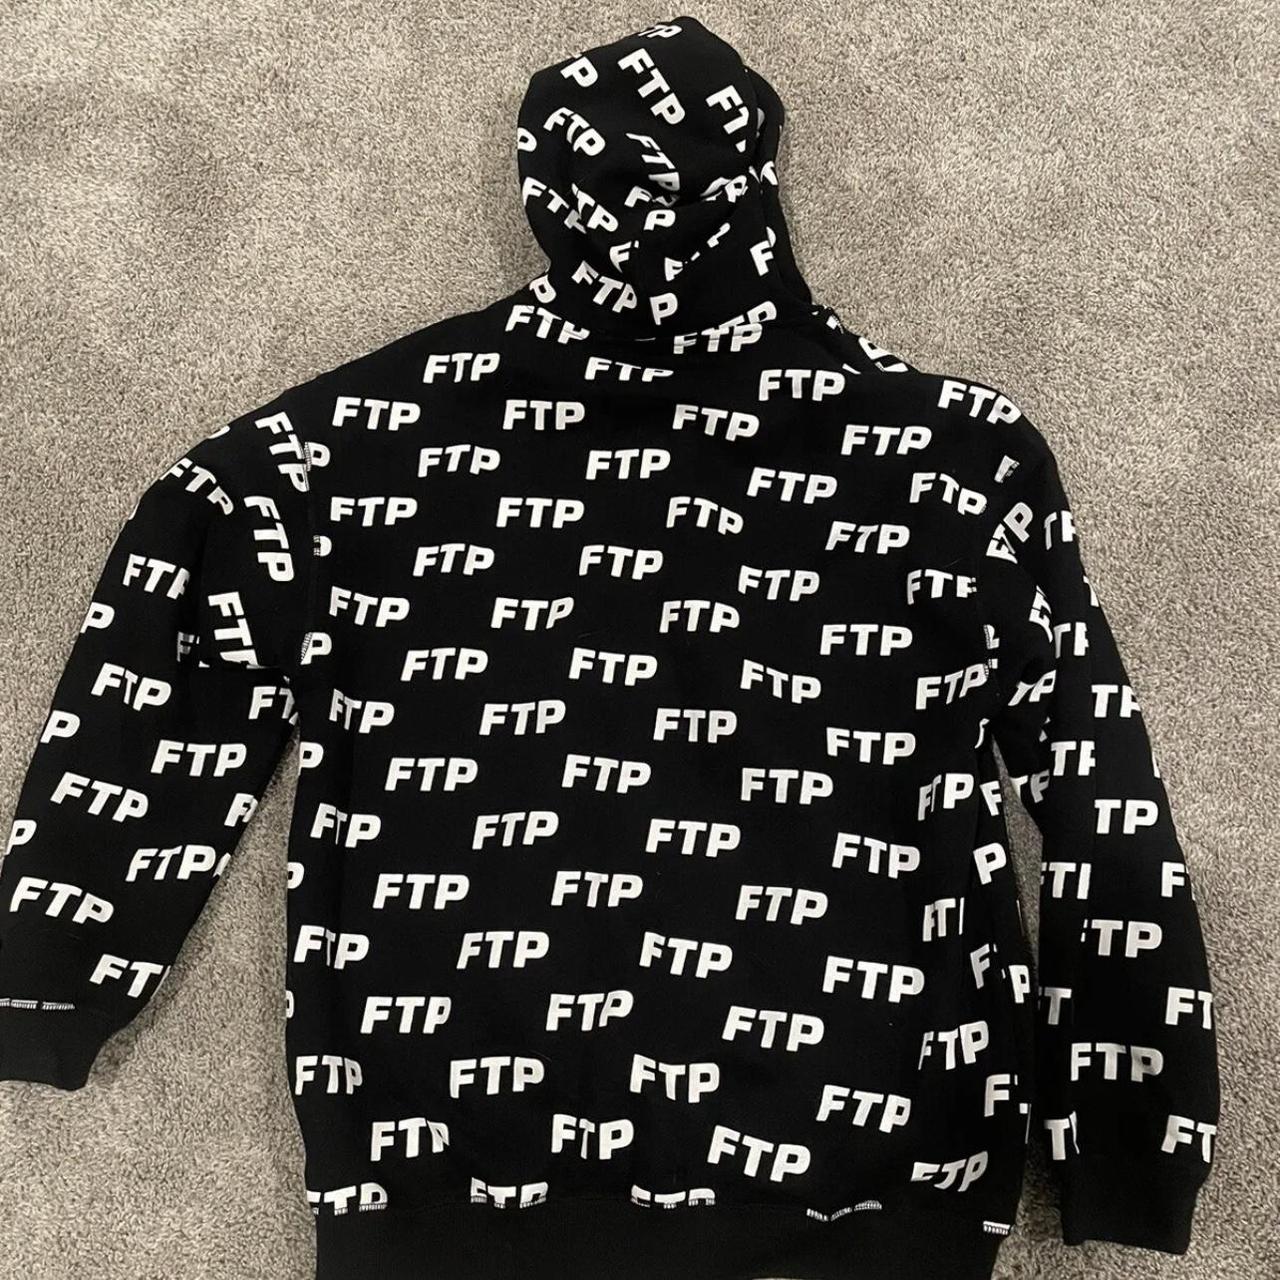 ISO all over logo ftp hoodie Need a size Xl or xxl... - Depop